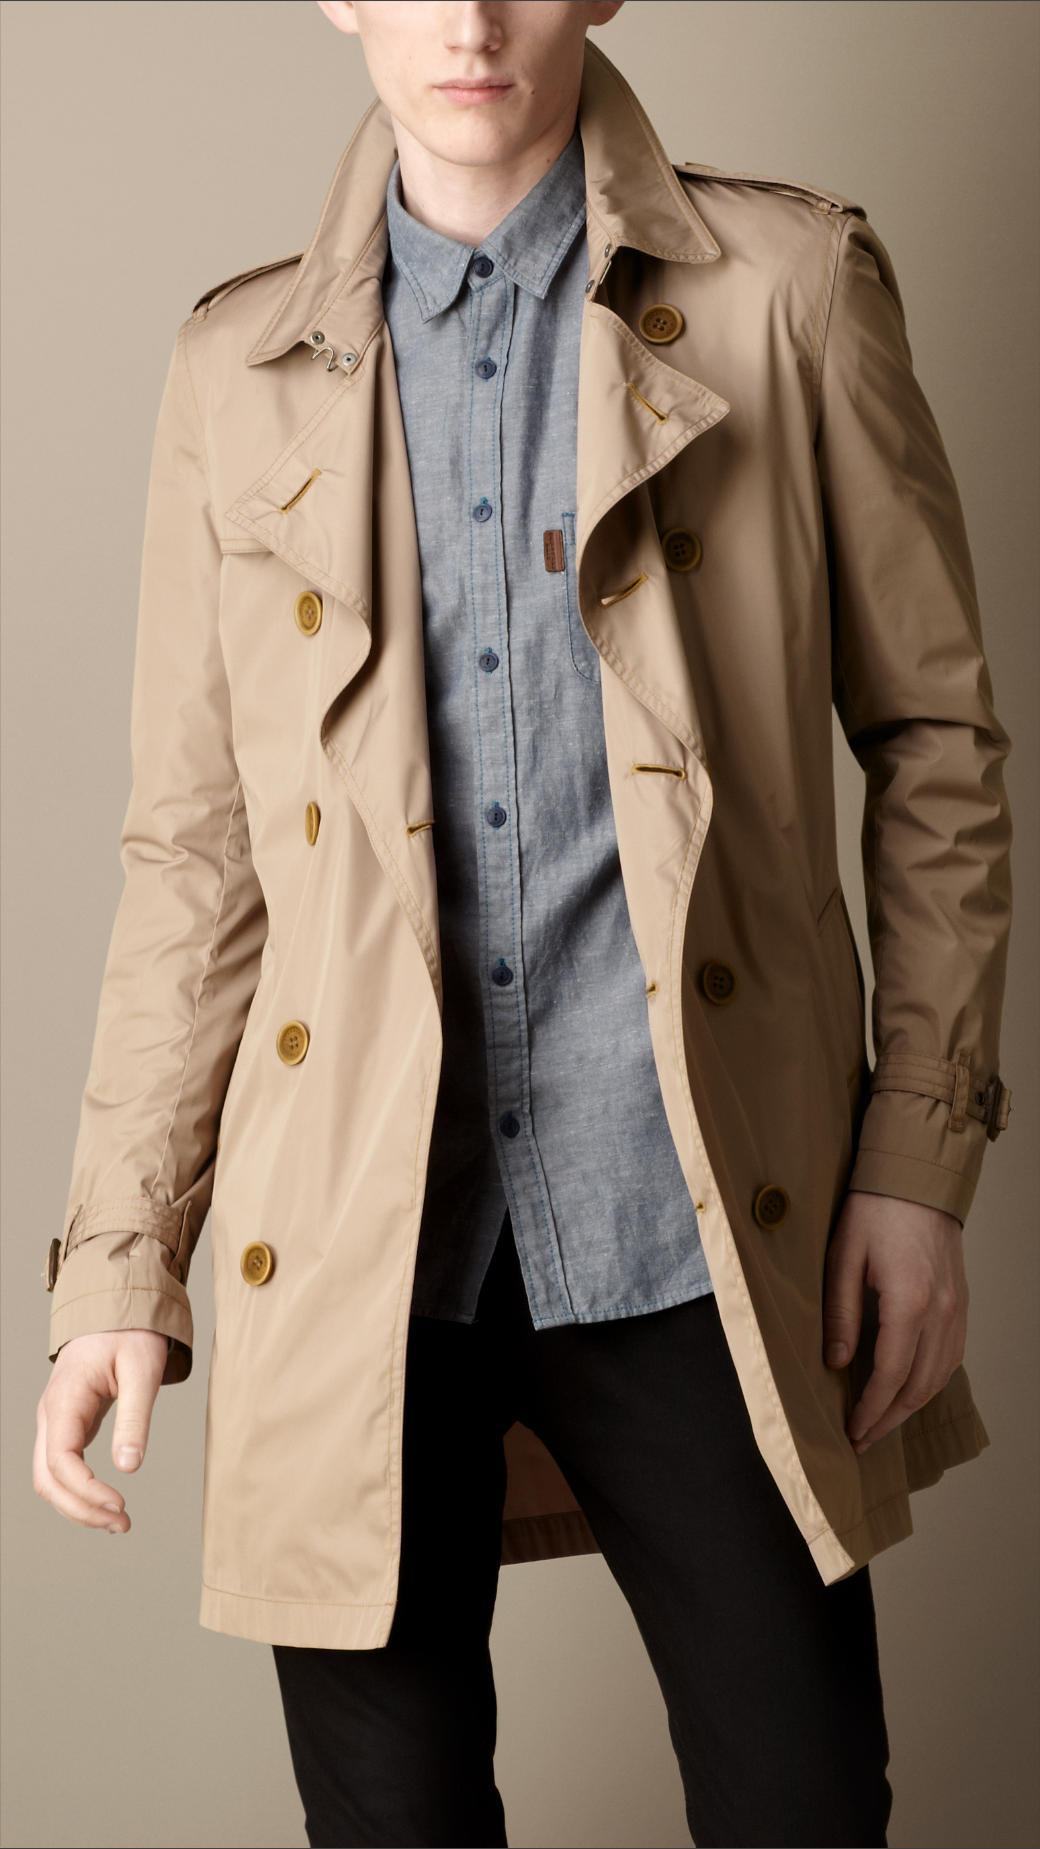 Lyst - Burberry Mid-Length Lightweight Trench Coat in Natural for Men